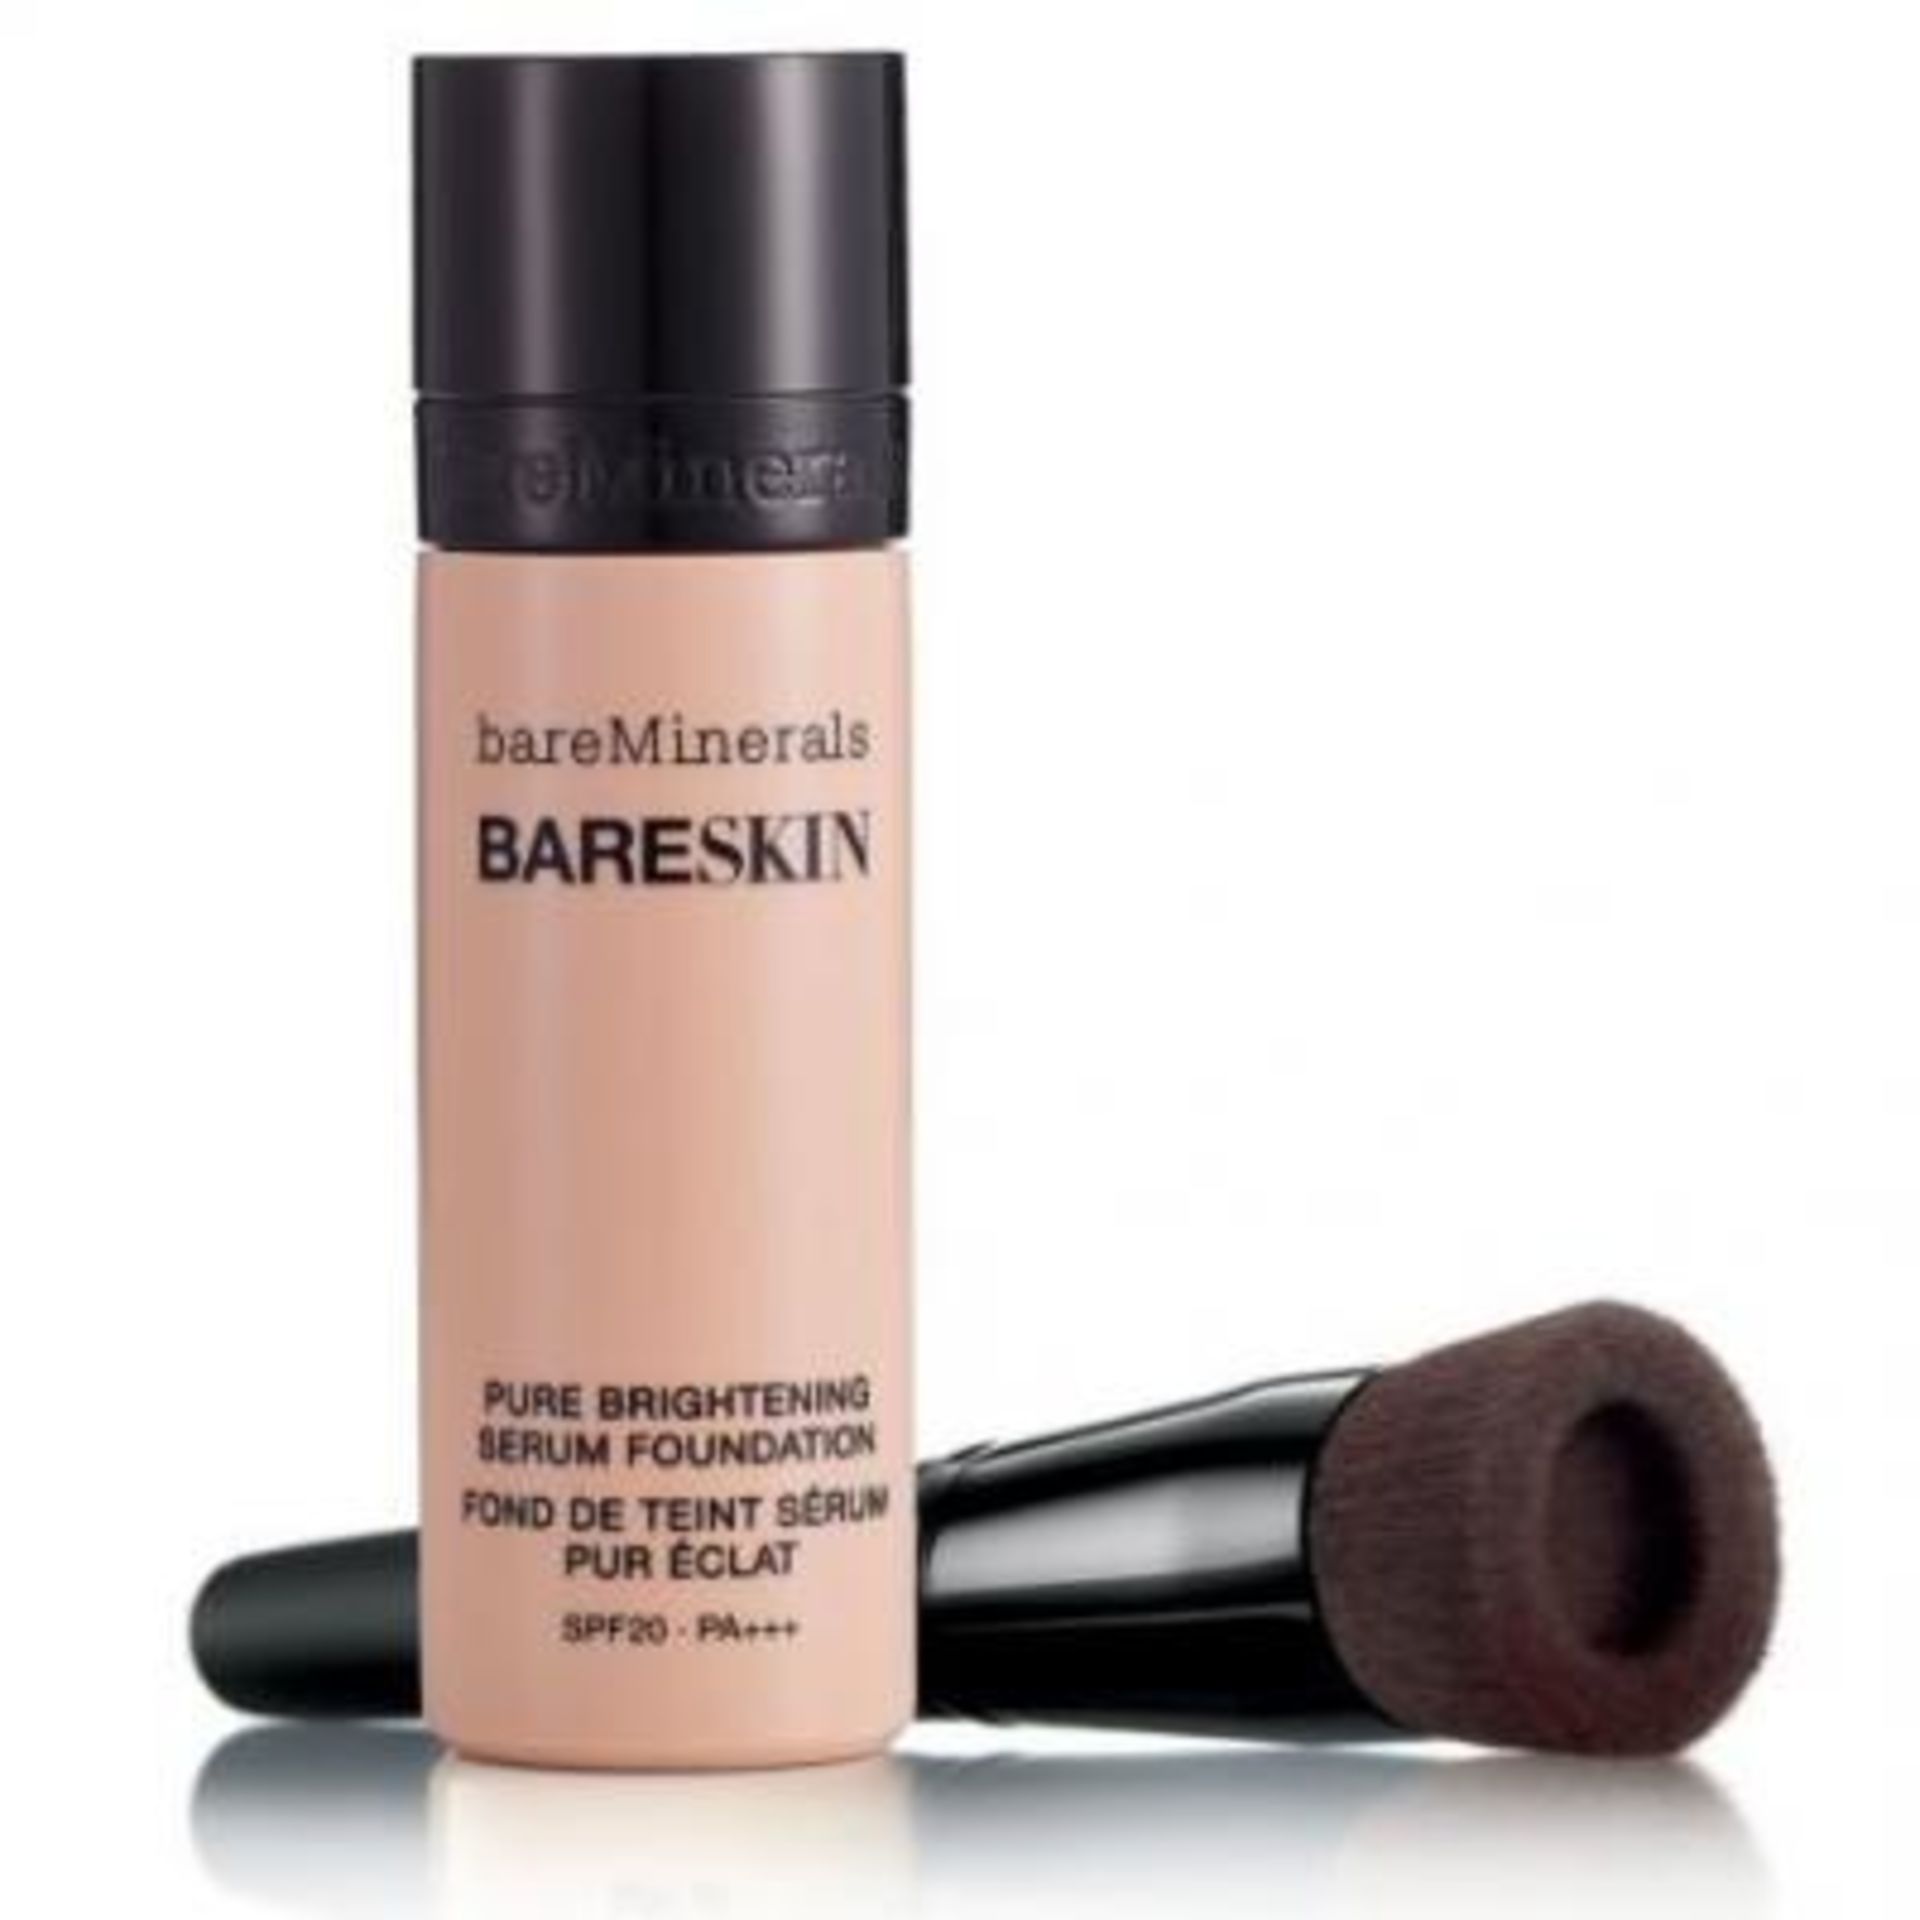 1 x Bare Escentuals bareMinerals “BARESKIN” Perfecting Face Brush - Genuine Product - Brand New - Image 6 of 14